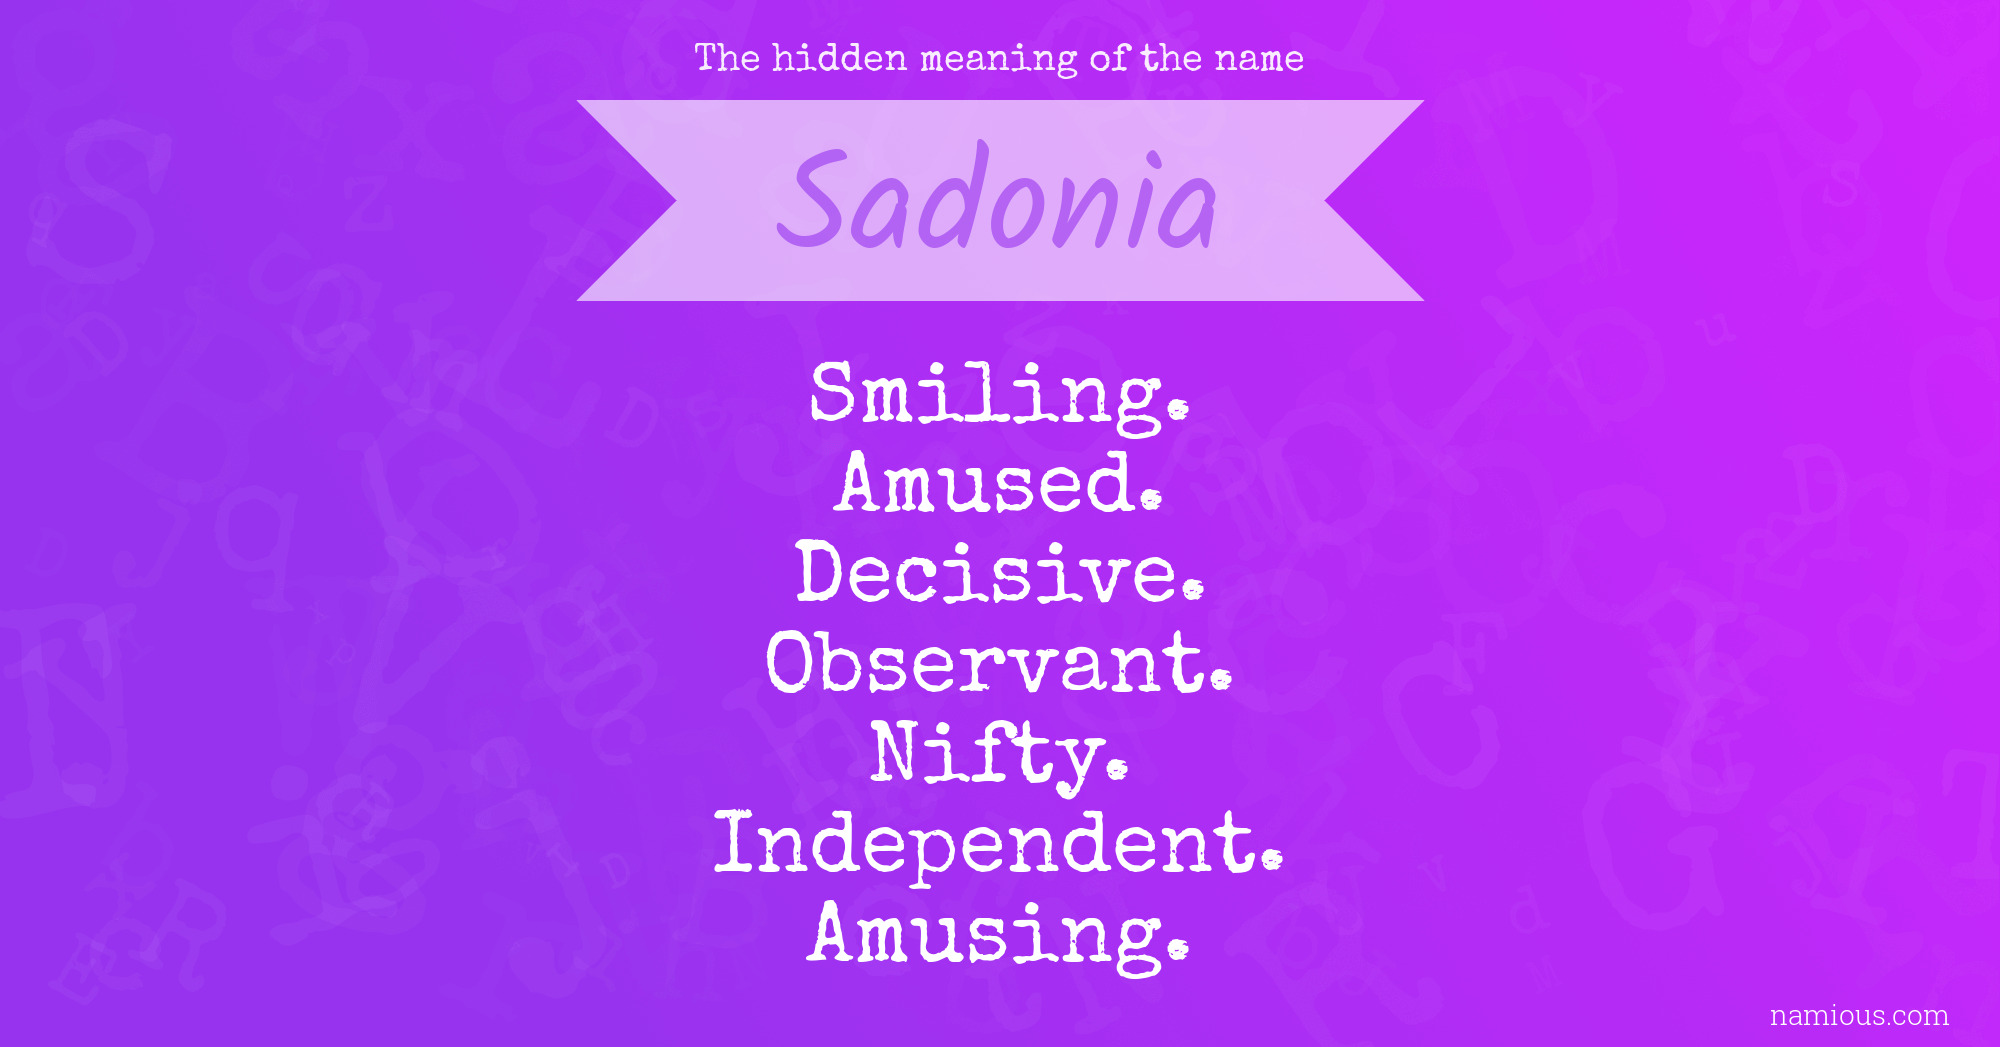 The hidden meaning of the name Sadonia